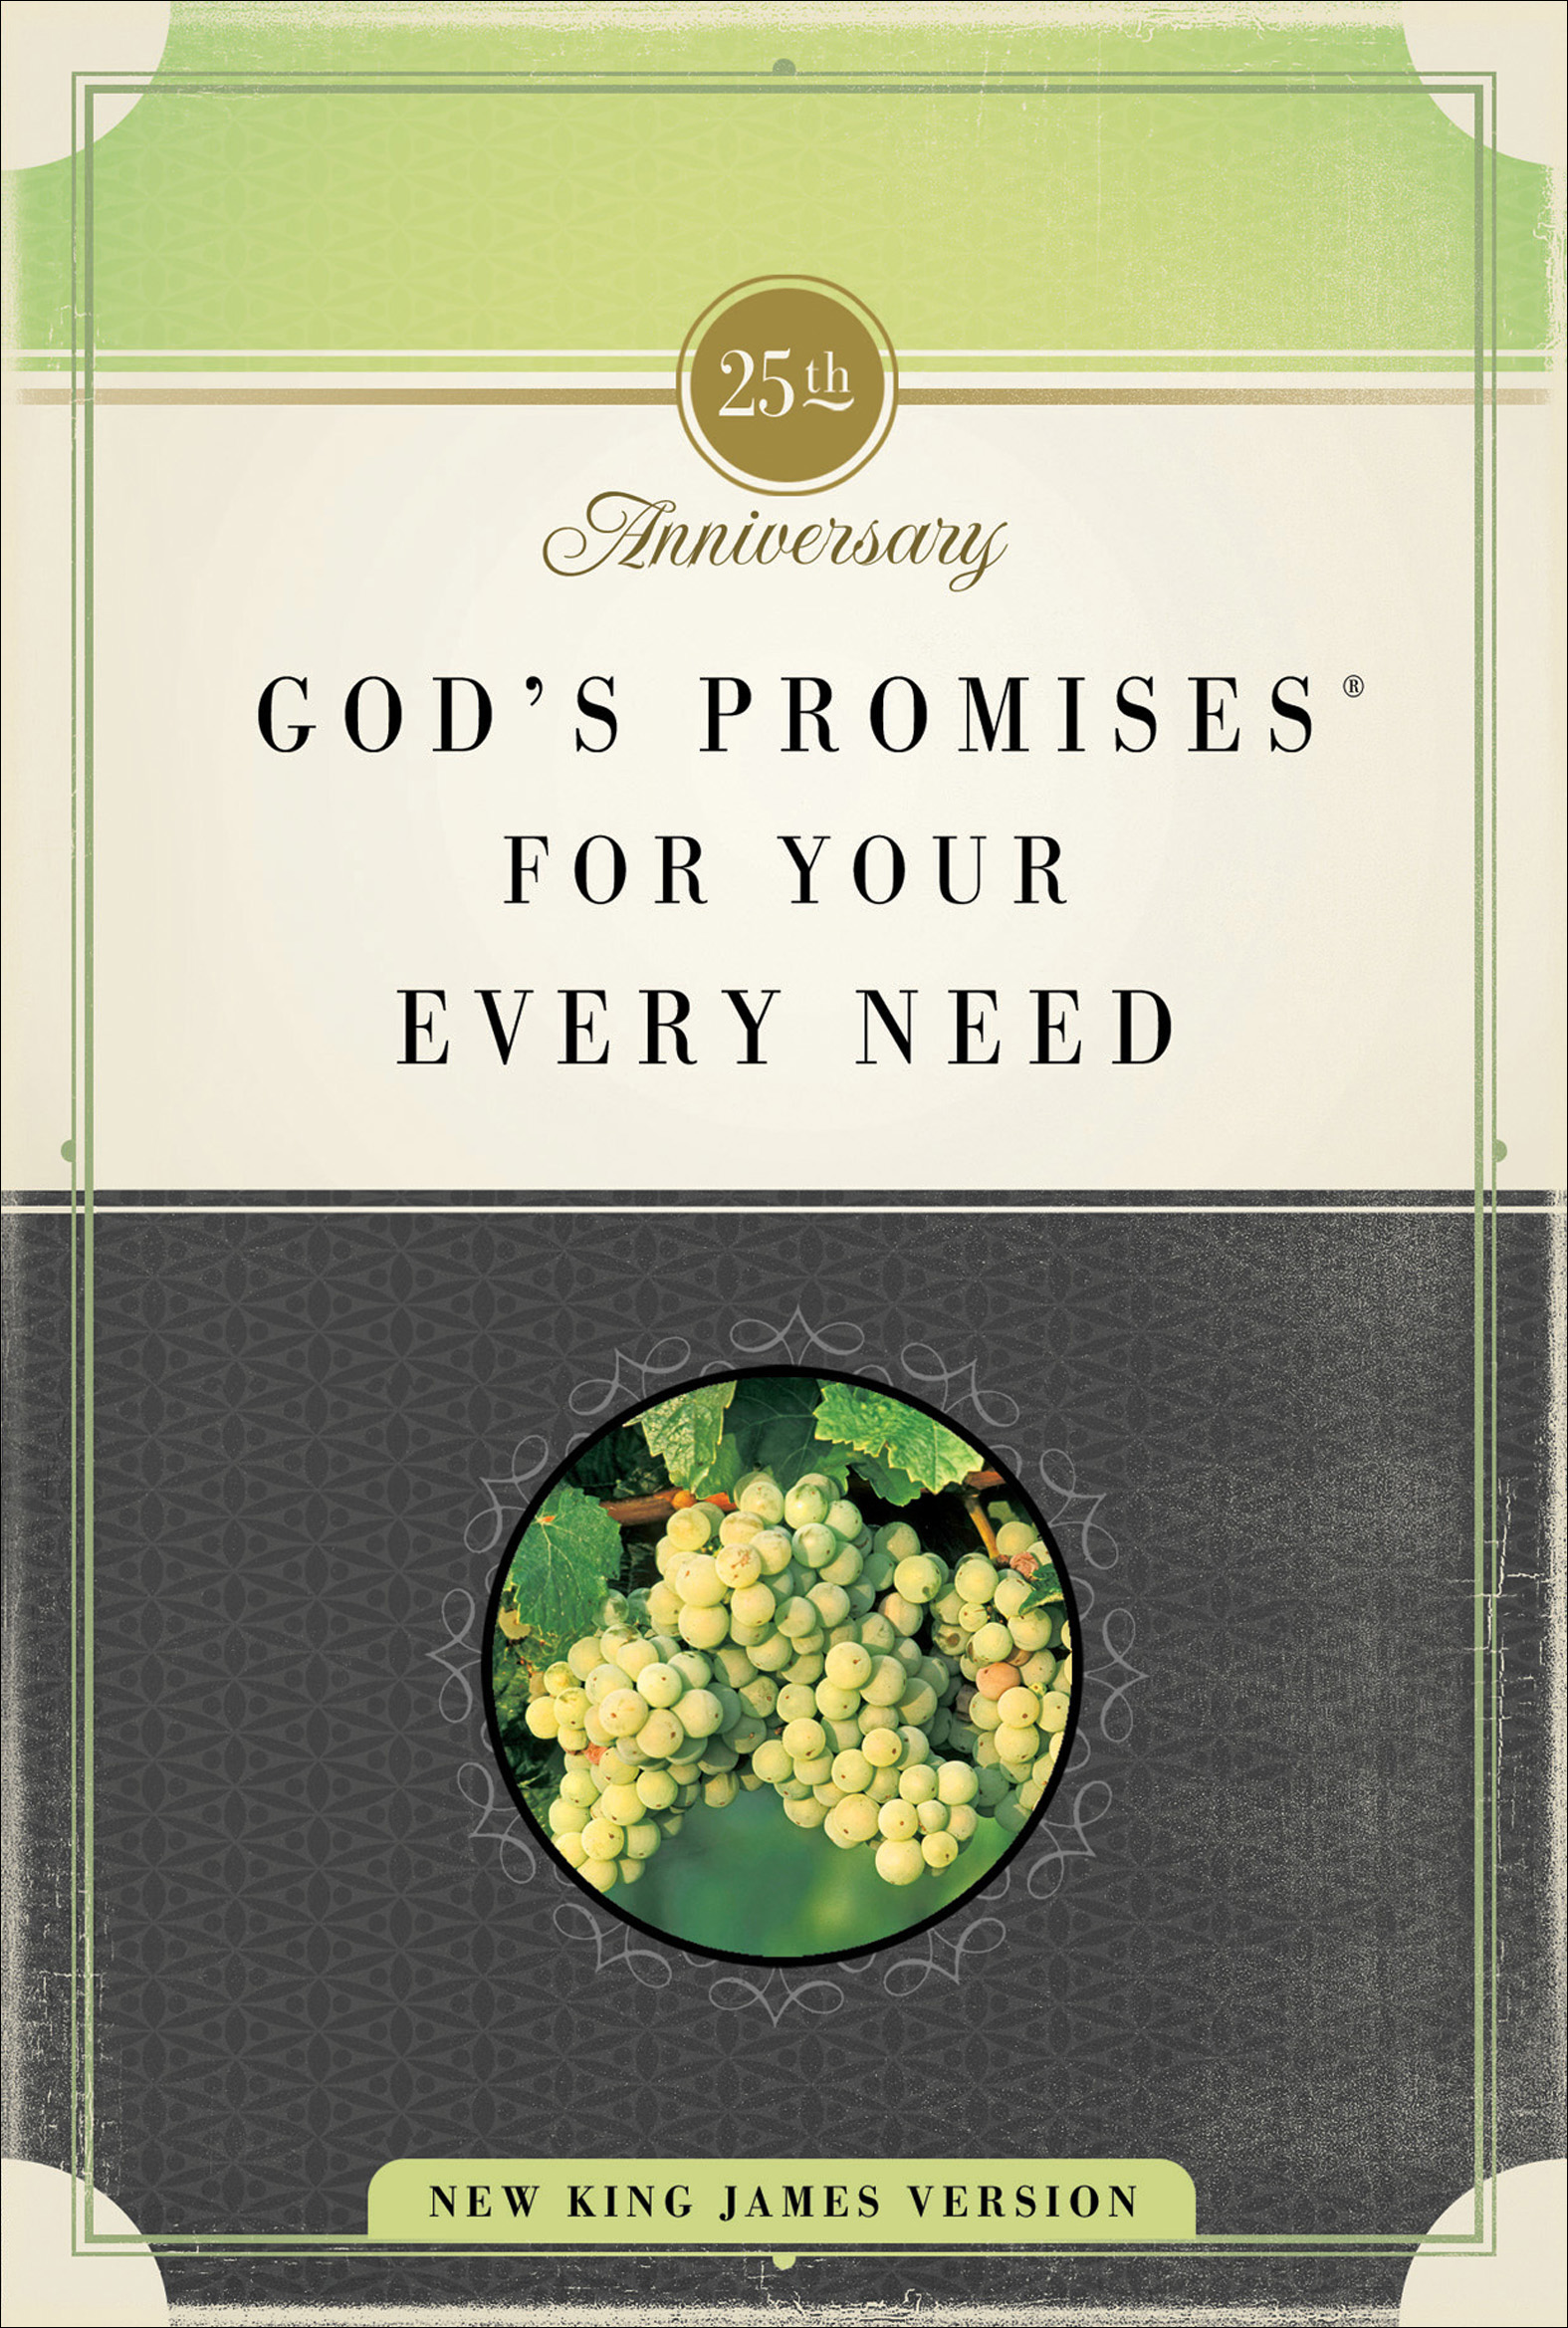 God's Promises for Your Every Need cover image